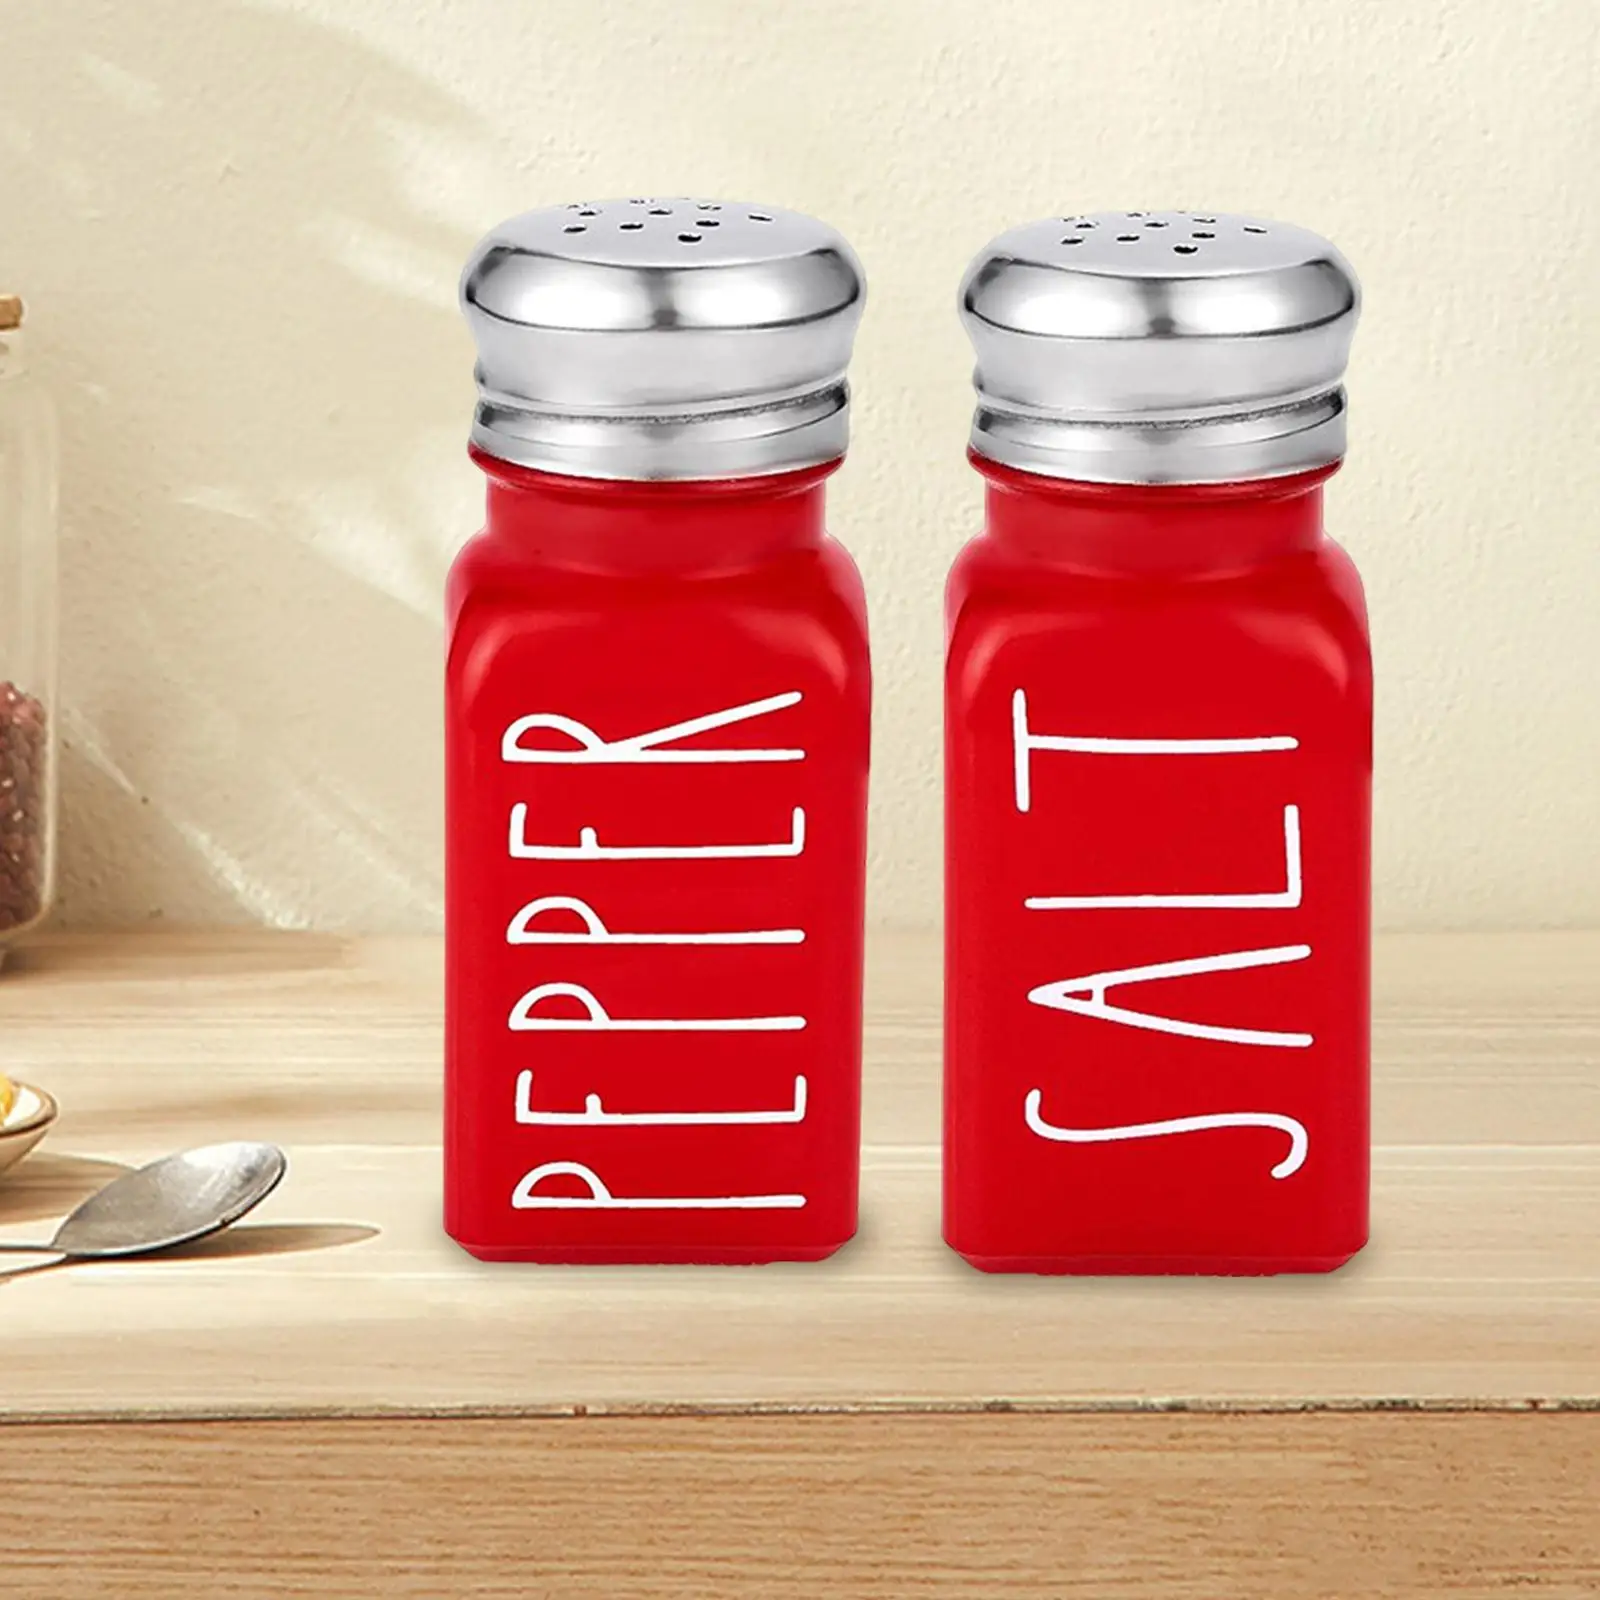 2Pcs Modern  and Pepper Shakers Set Pots Condiment Bottle Seasoning Jars Set for  Kitchen Table Decor Words Printed